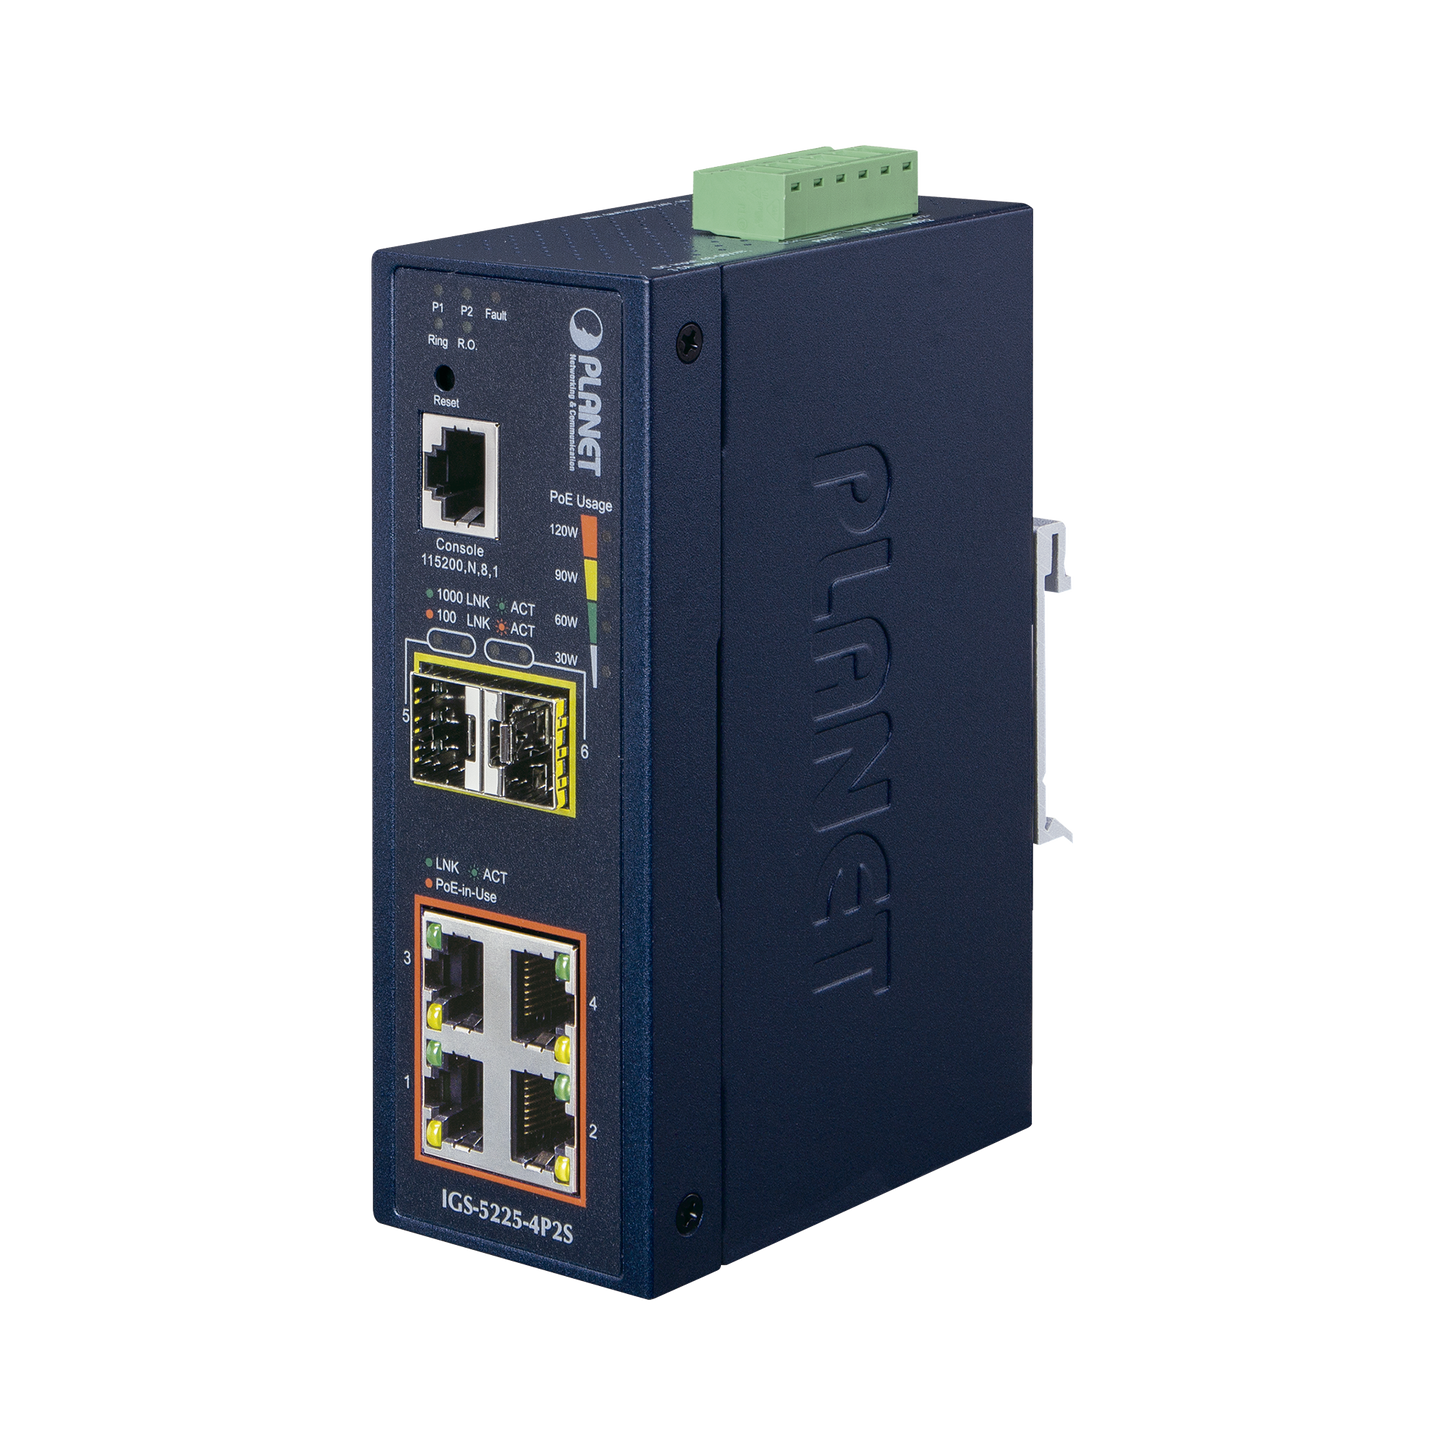 Switch Industrial Administrable Capa 2, 4 Puertos PoE 802.3af/at 10/100/1000T, 2 Puertos SFP 100/1000X